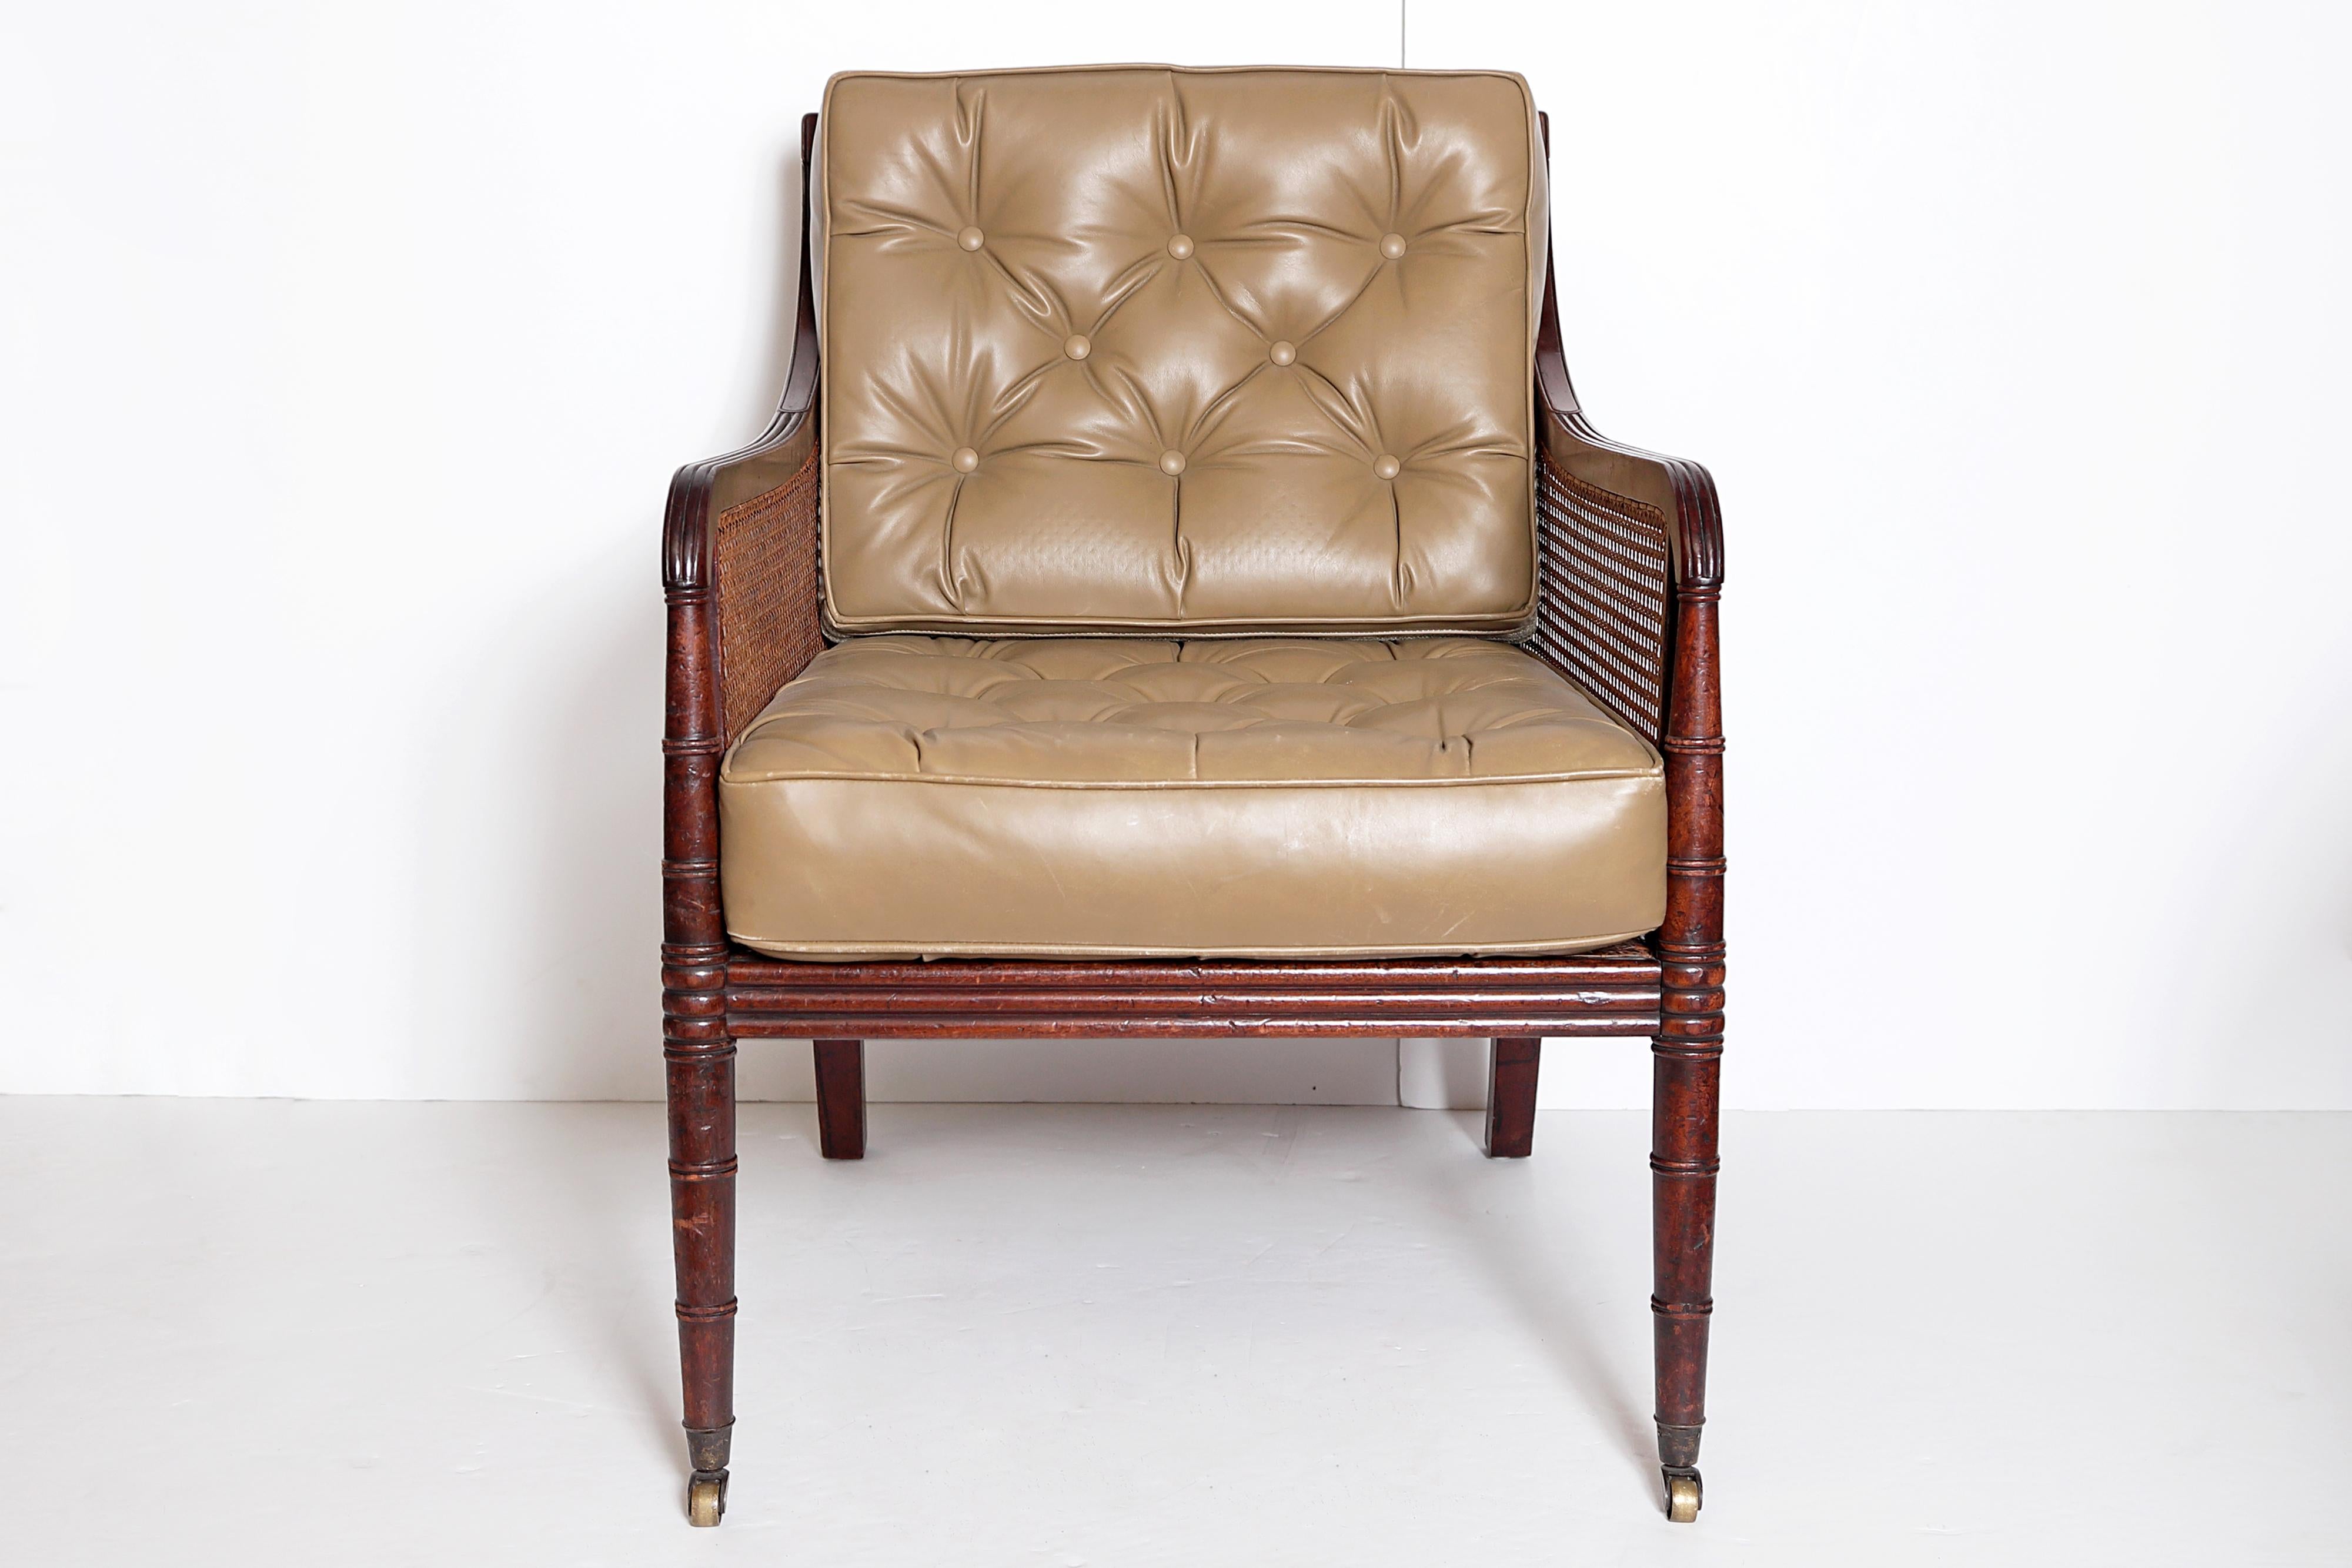 Turned Period English Regency Library Chair